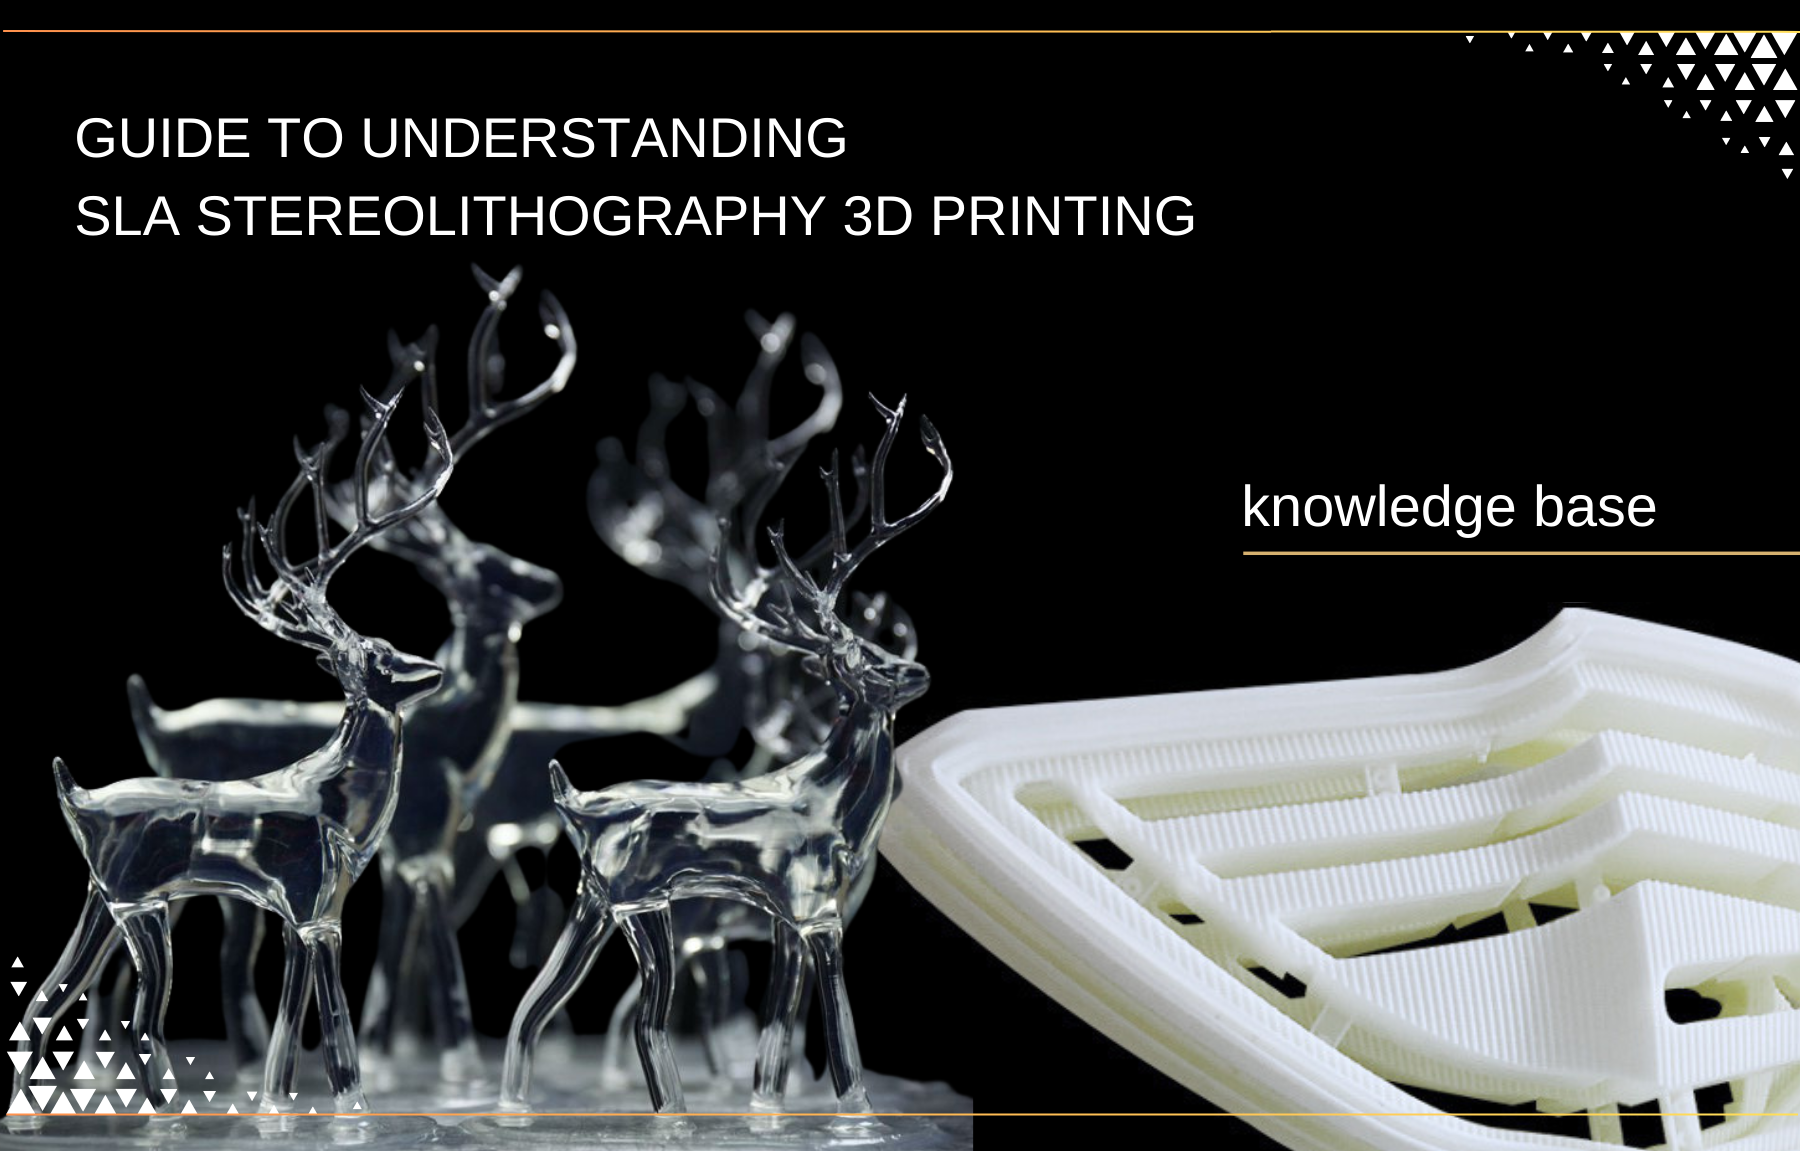 Guide to Understanding SLA (Stereolithography) 3D printing